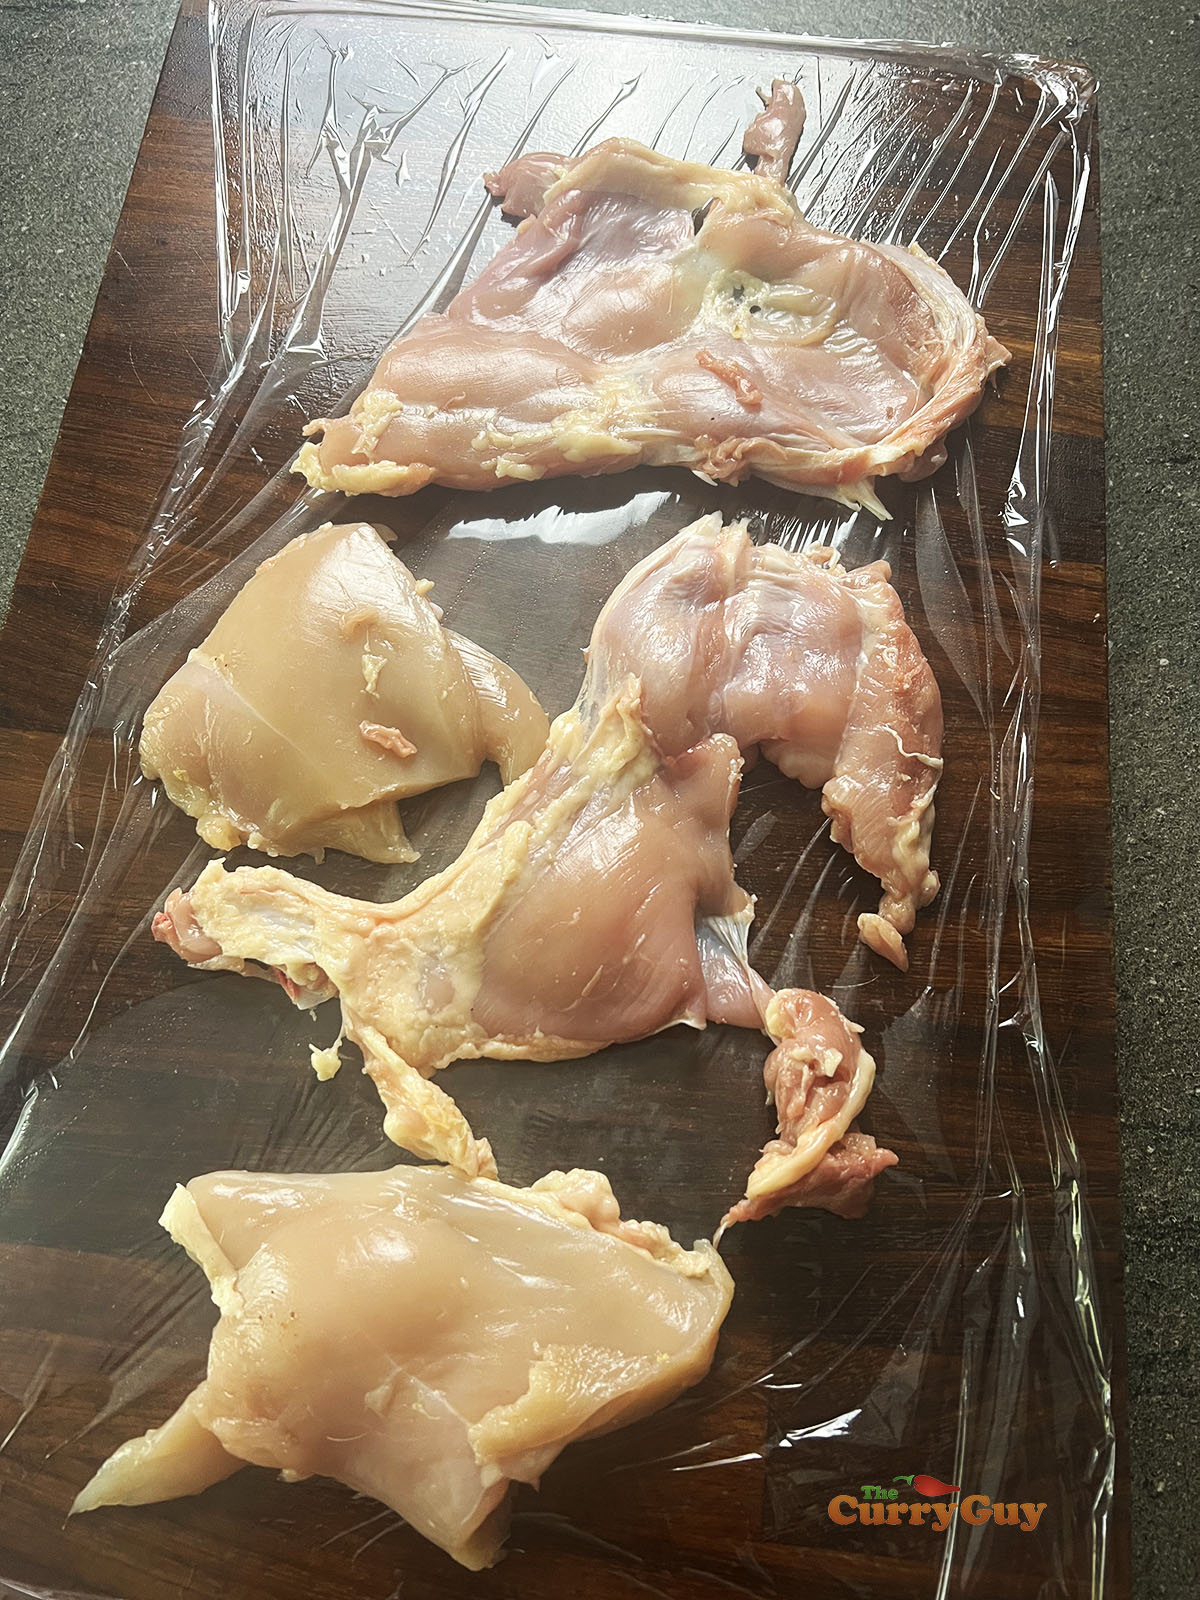 Chicken pieces on clingfilm.